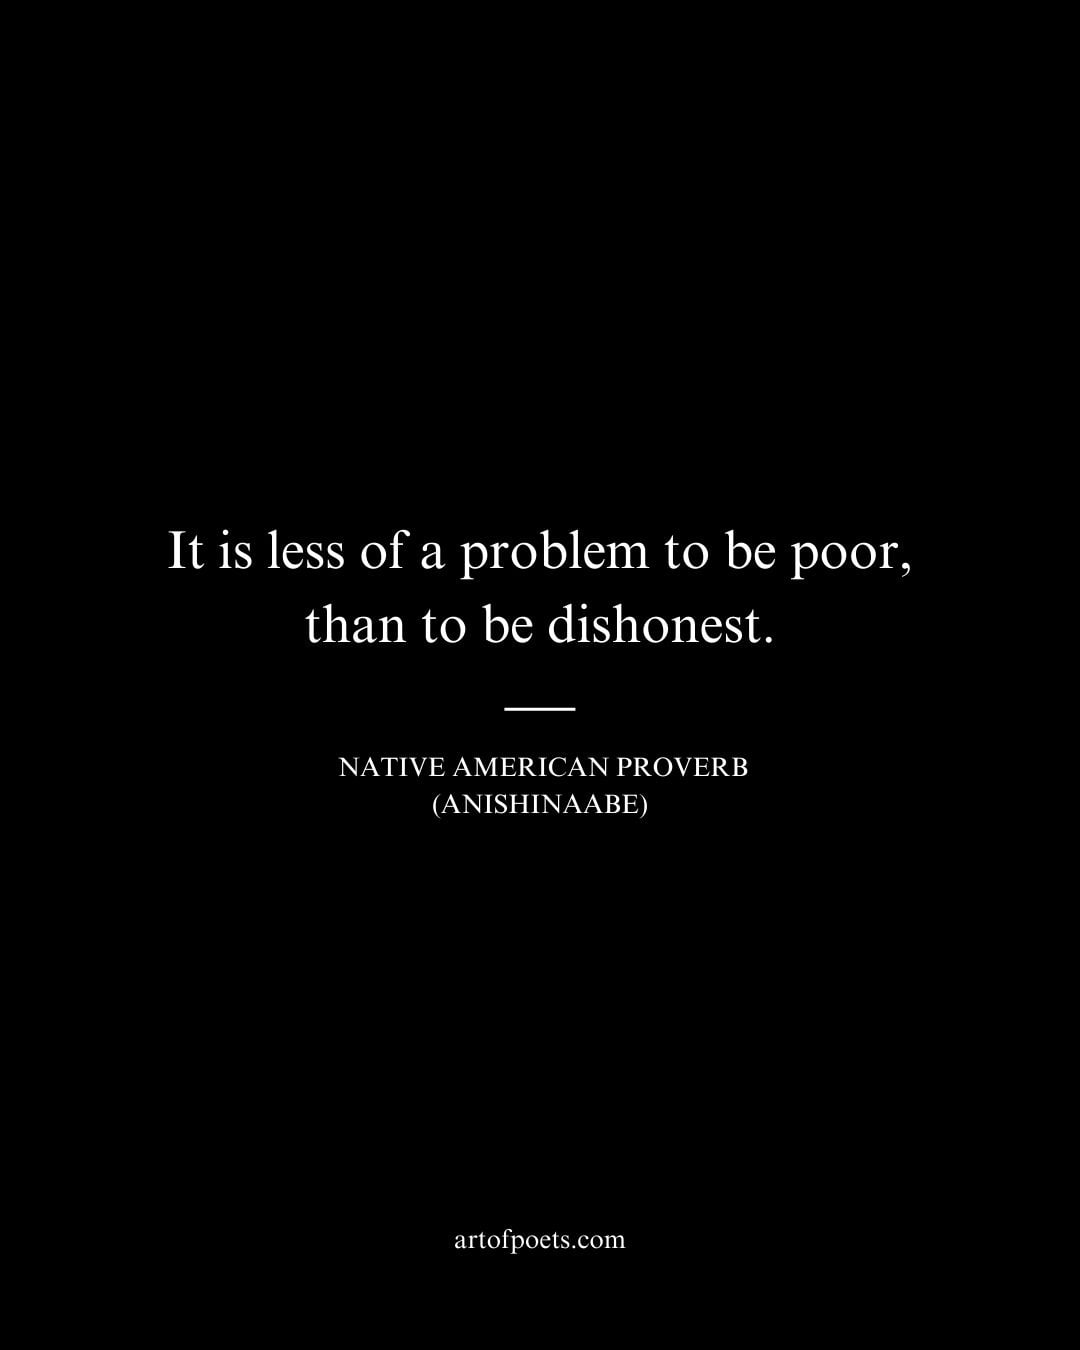 It is less of a problem to be poor than to be dishonest